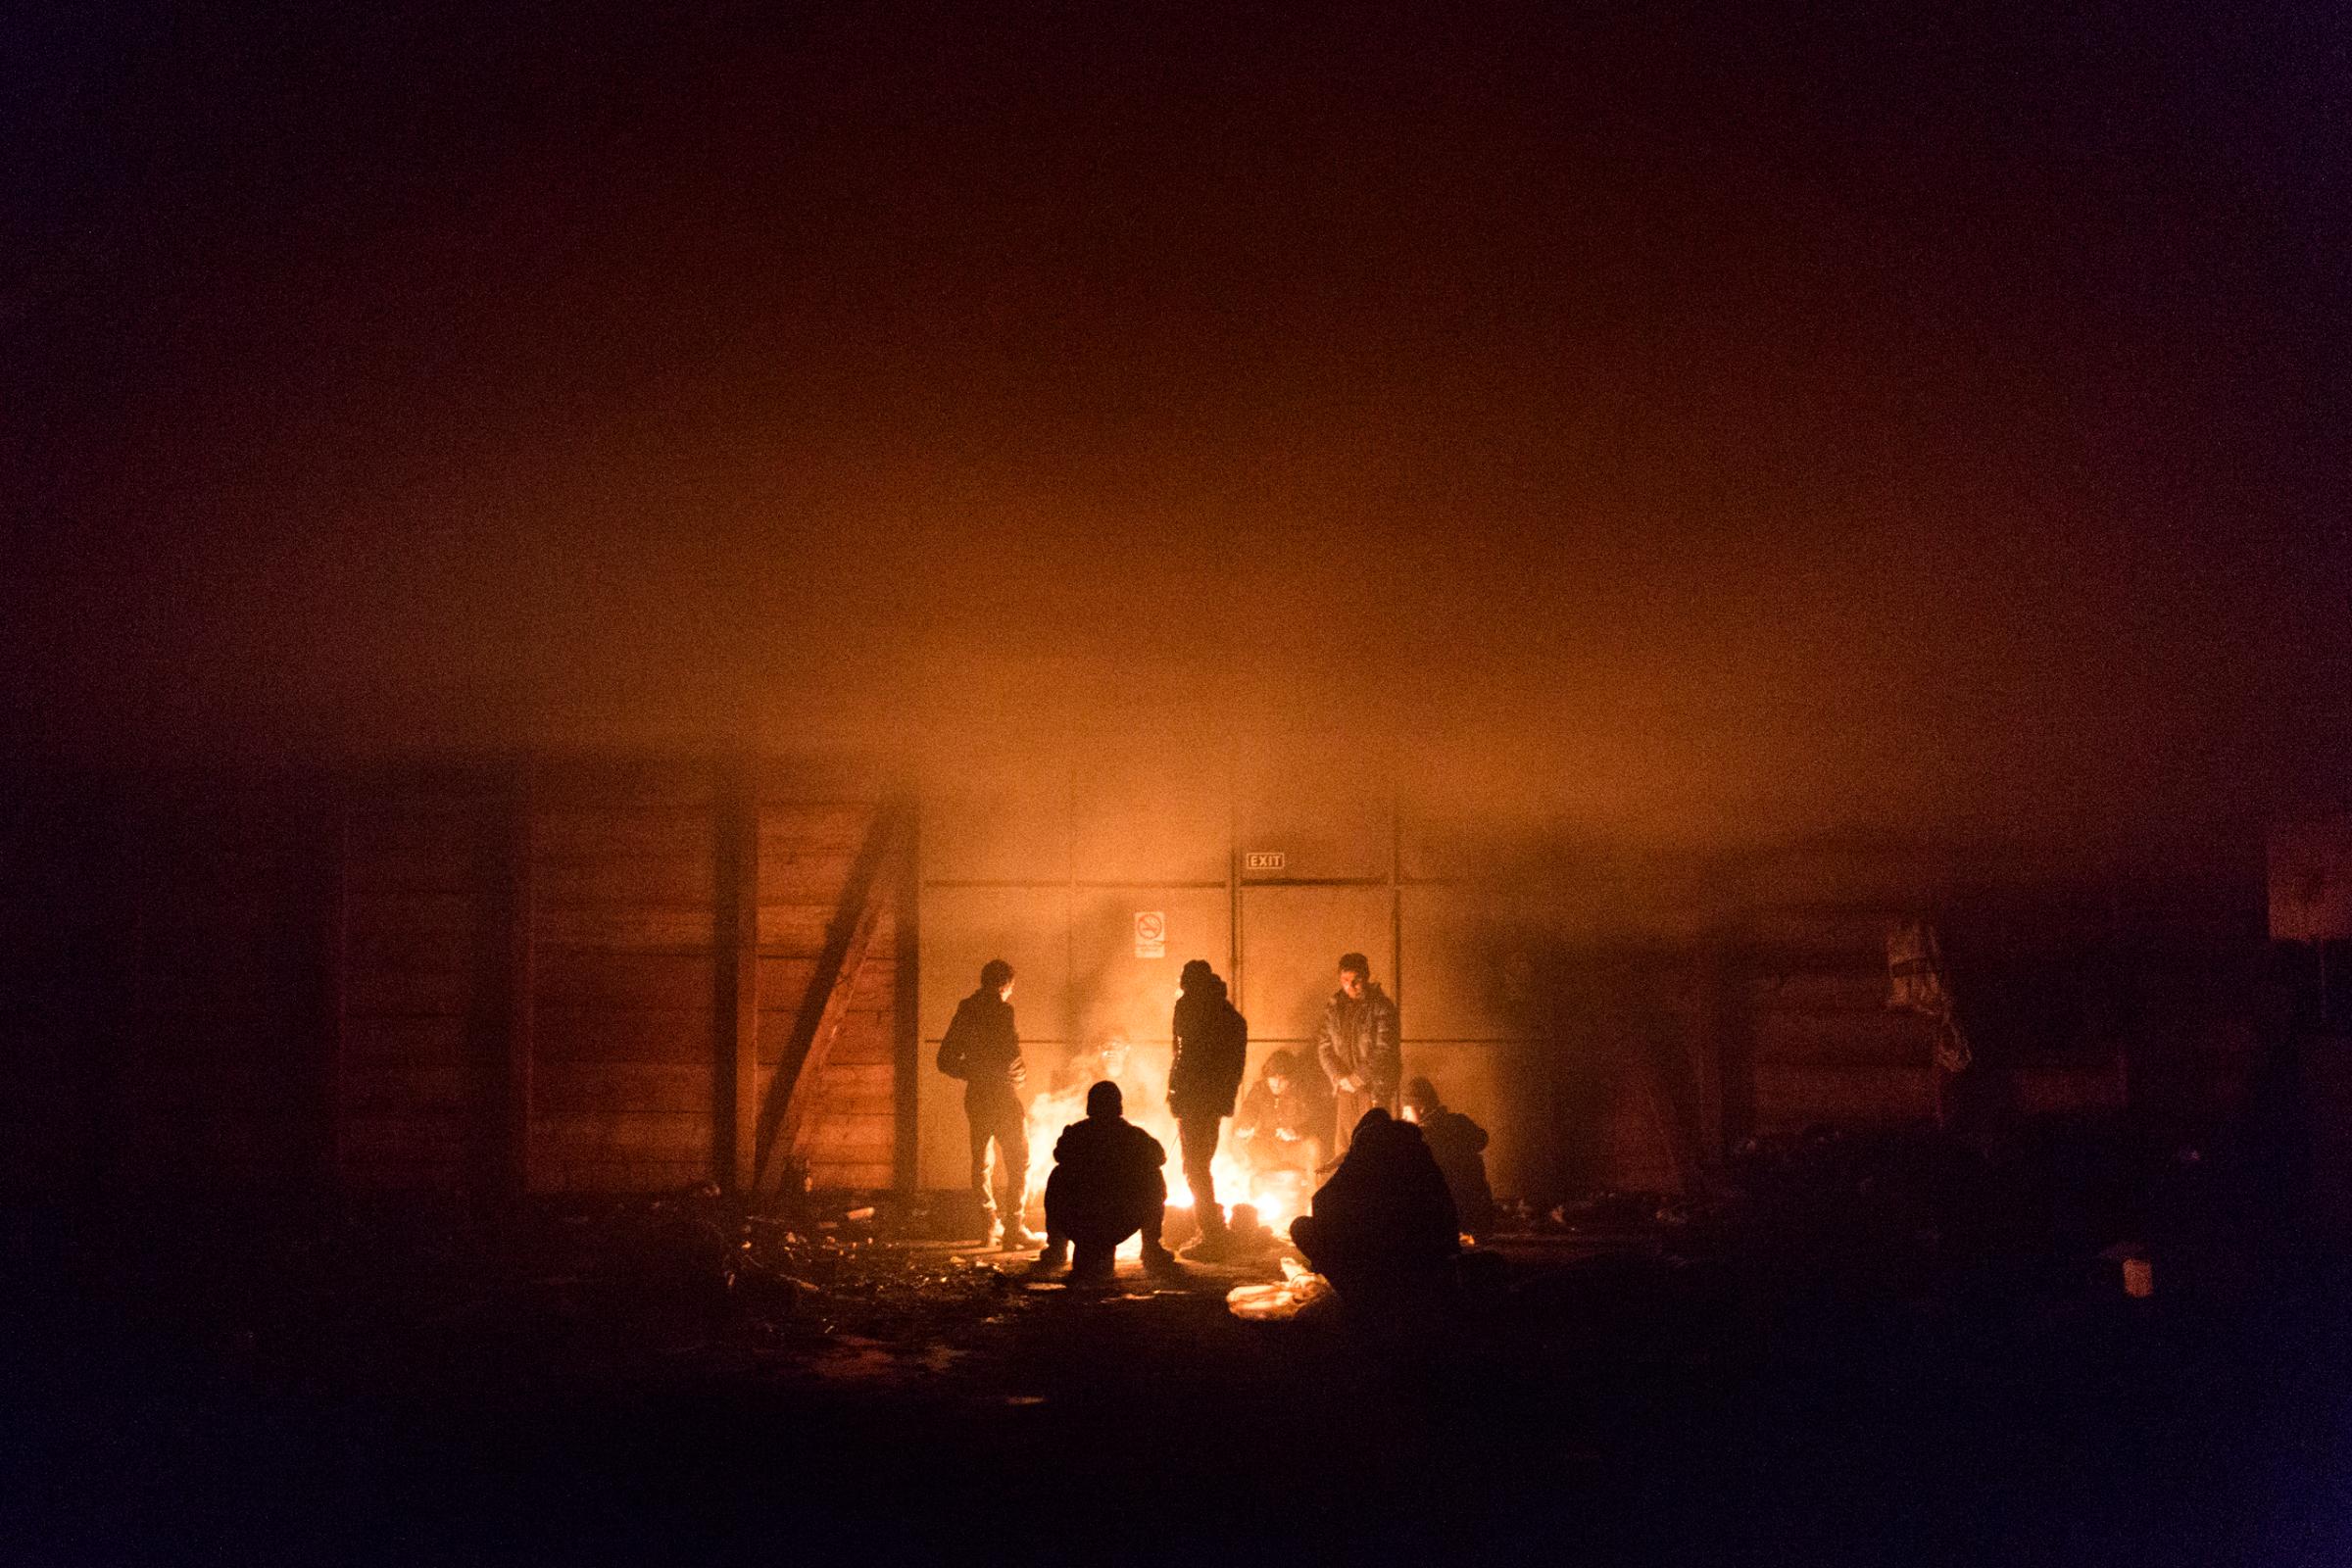 A group of unhacampaniend minors from Afghanistan tries to keep warm by starting a makeshift fire in abandoned warehouse in Belgrade, Jan. 14, 2017